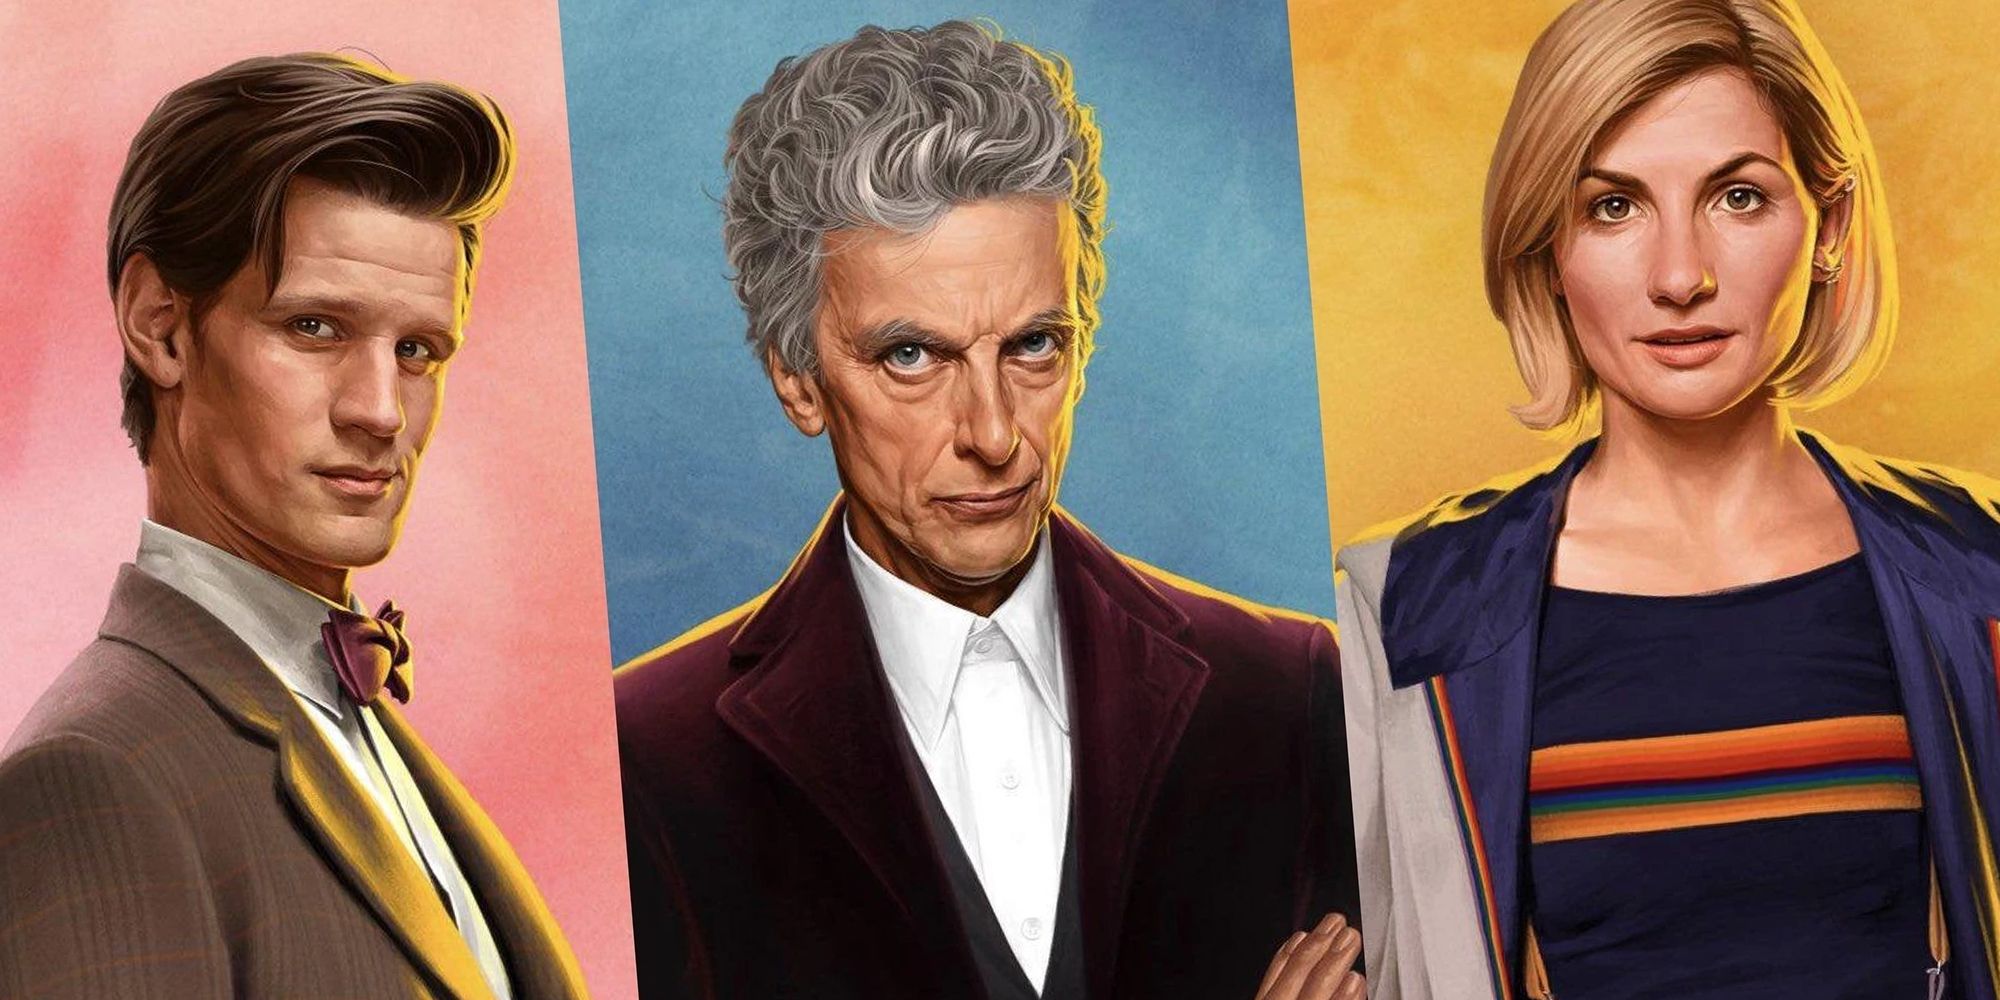 11th, 12th, and 13th Doctor separated into pink, blue, and yellow rectangles